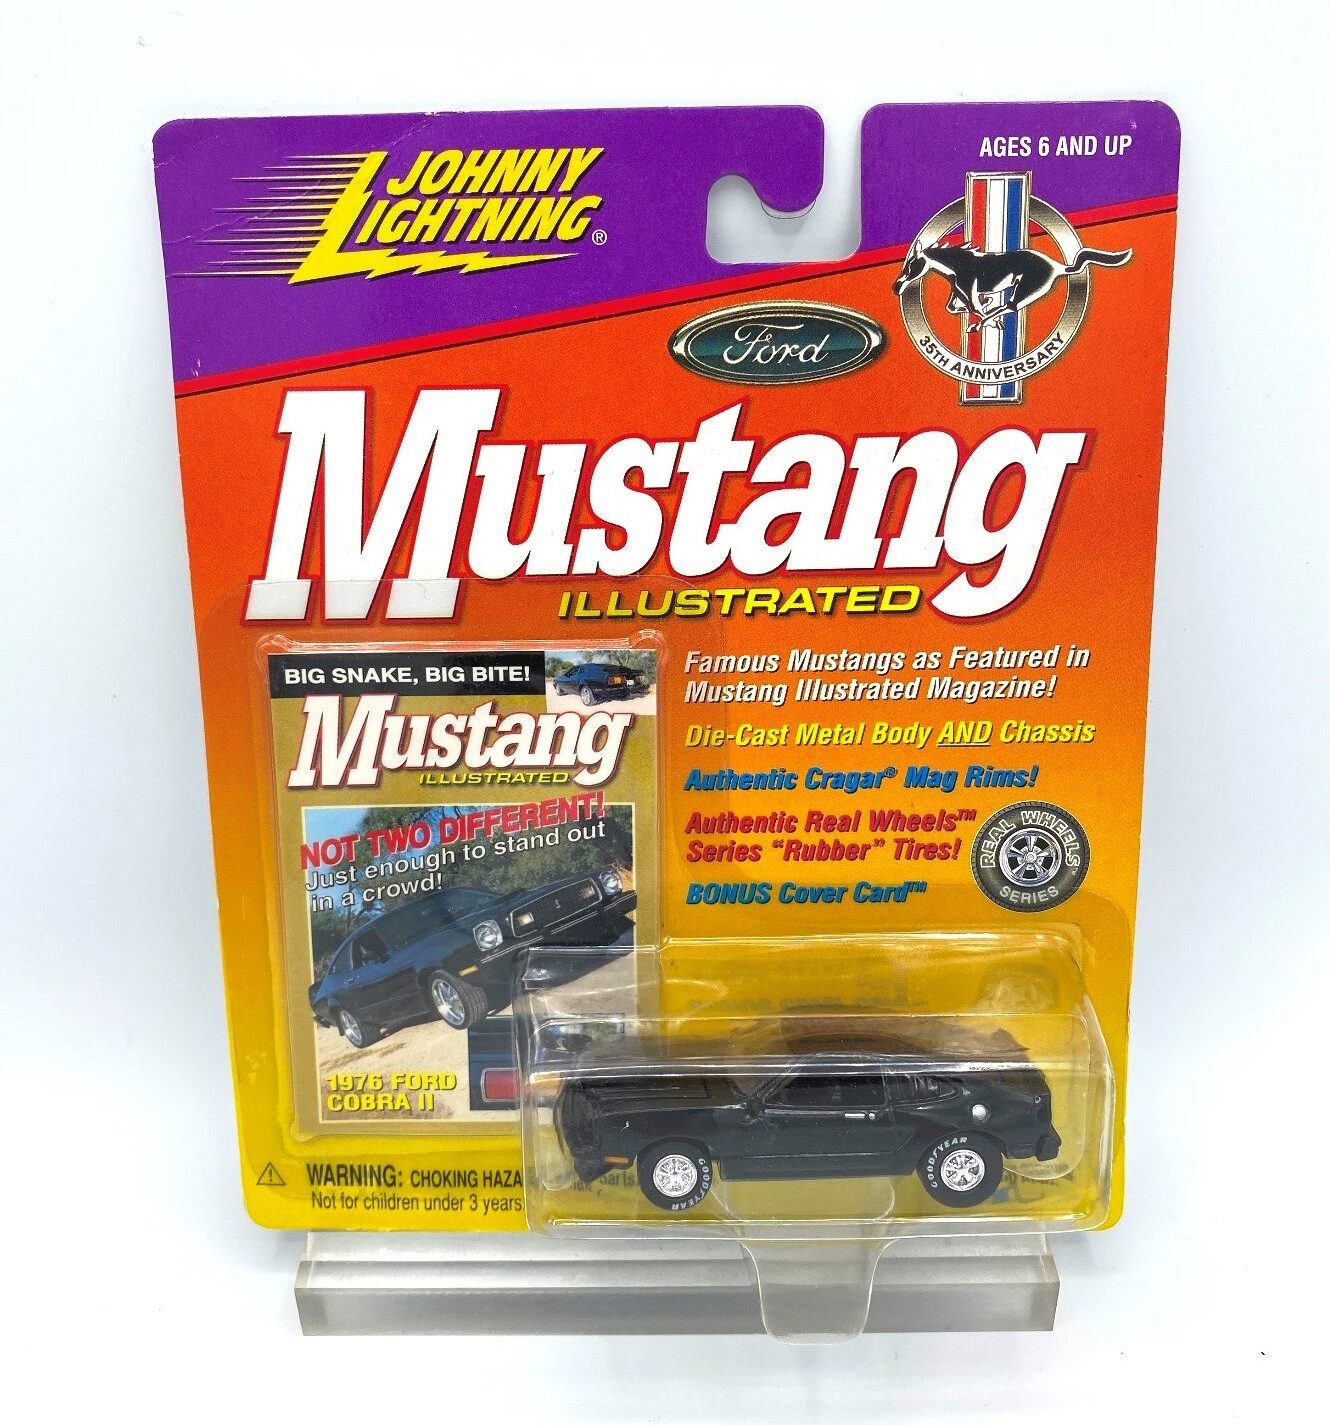 FORD MUSTANG 1999 Commemorative Edition Collector Cards SEALED New In Box 